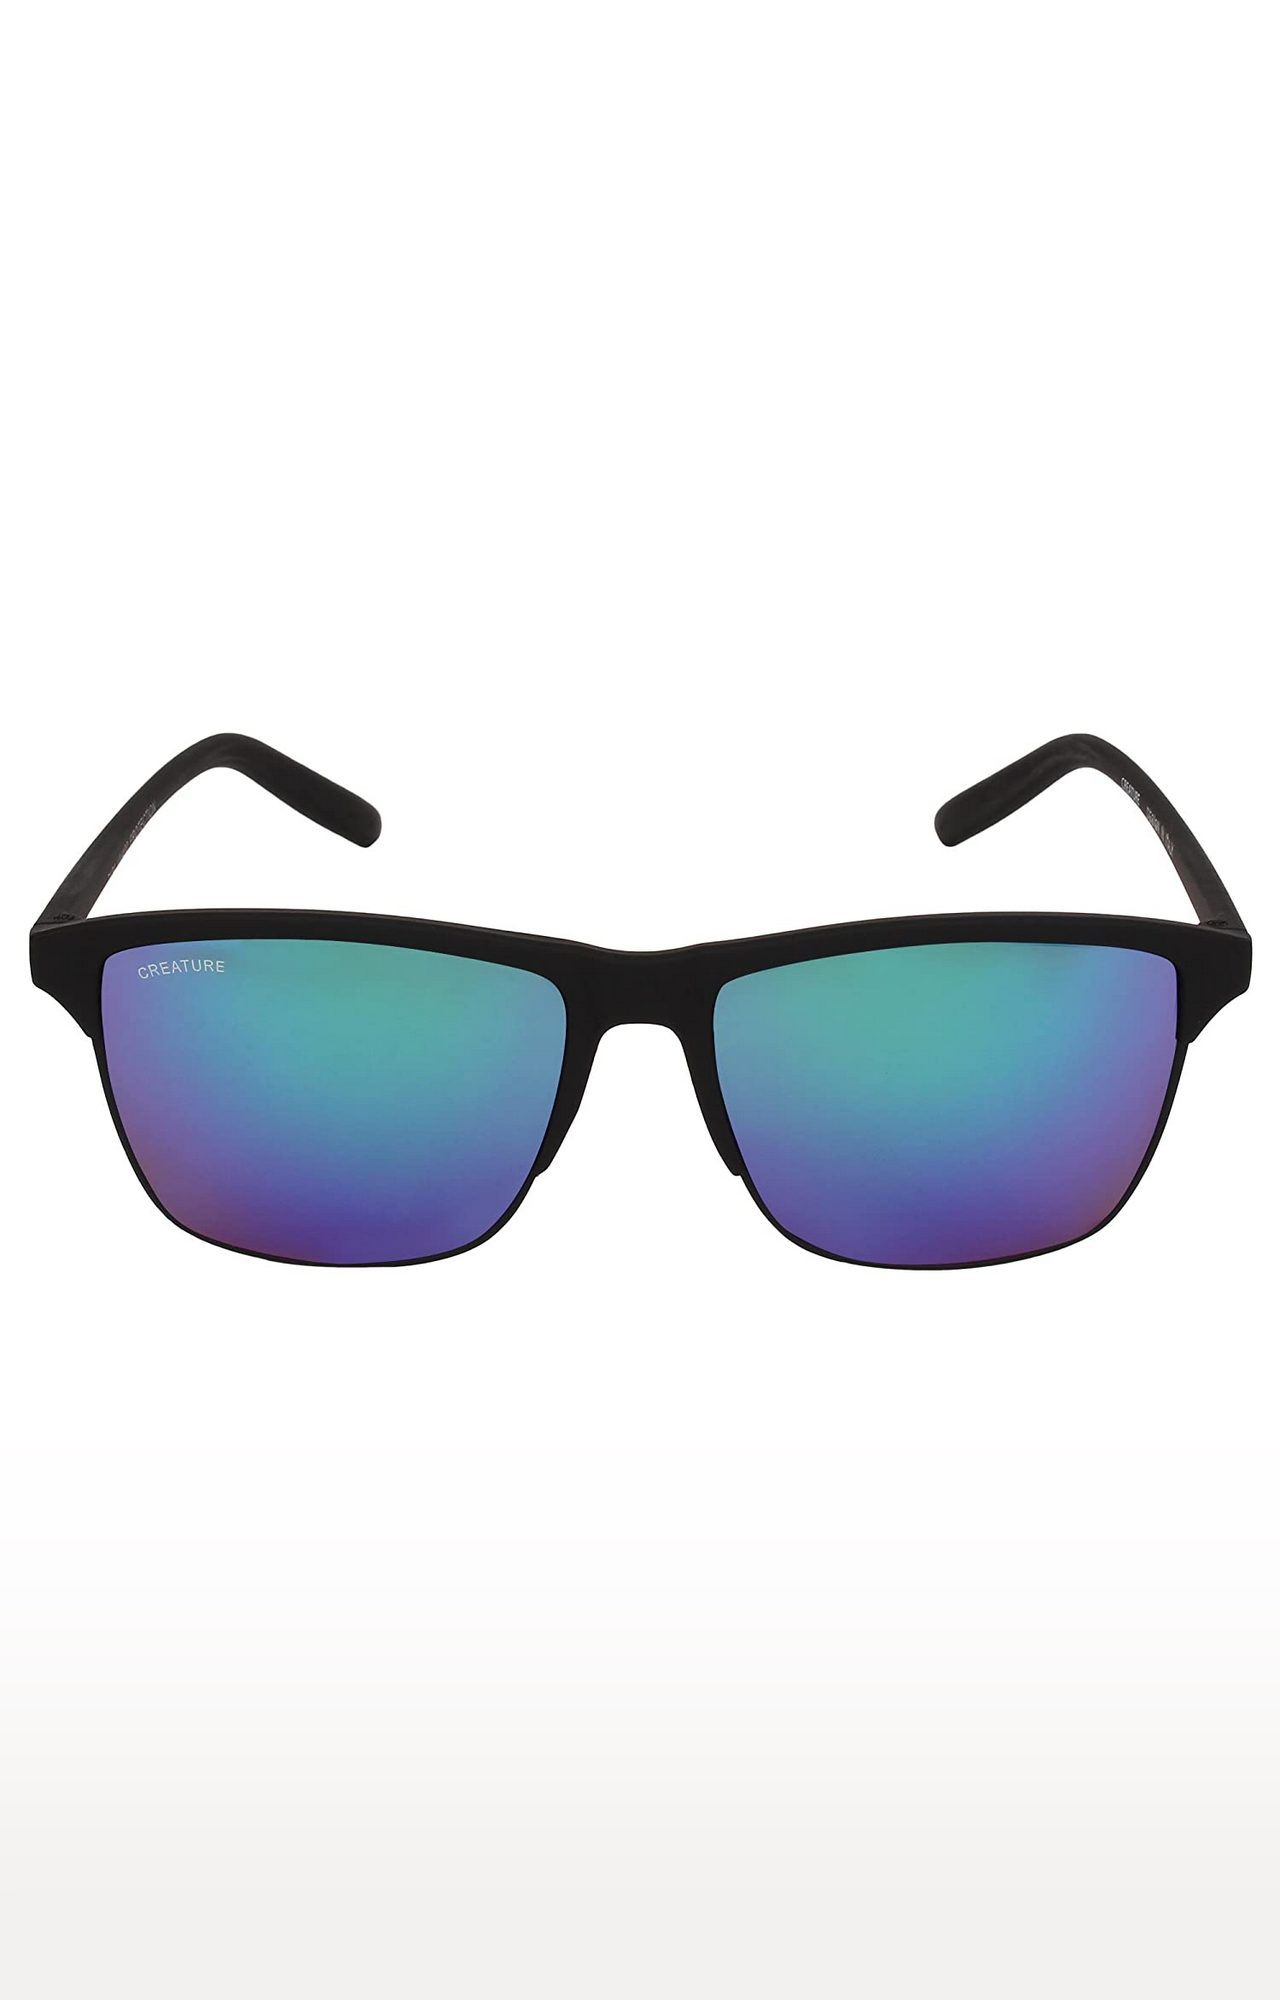 CREATURE | CREATURE Multicolored & Blue Sunglasses Combo with UV Protection (Lens-Multicolored & Blue|Frame-Brown & Black) 3